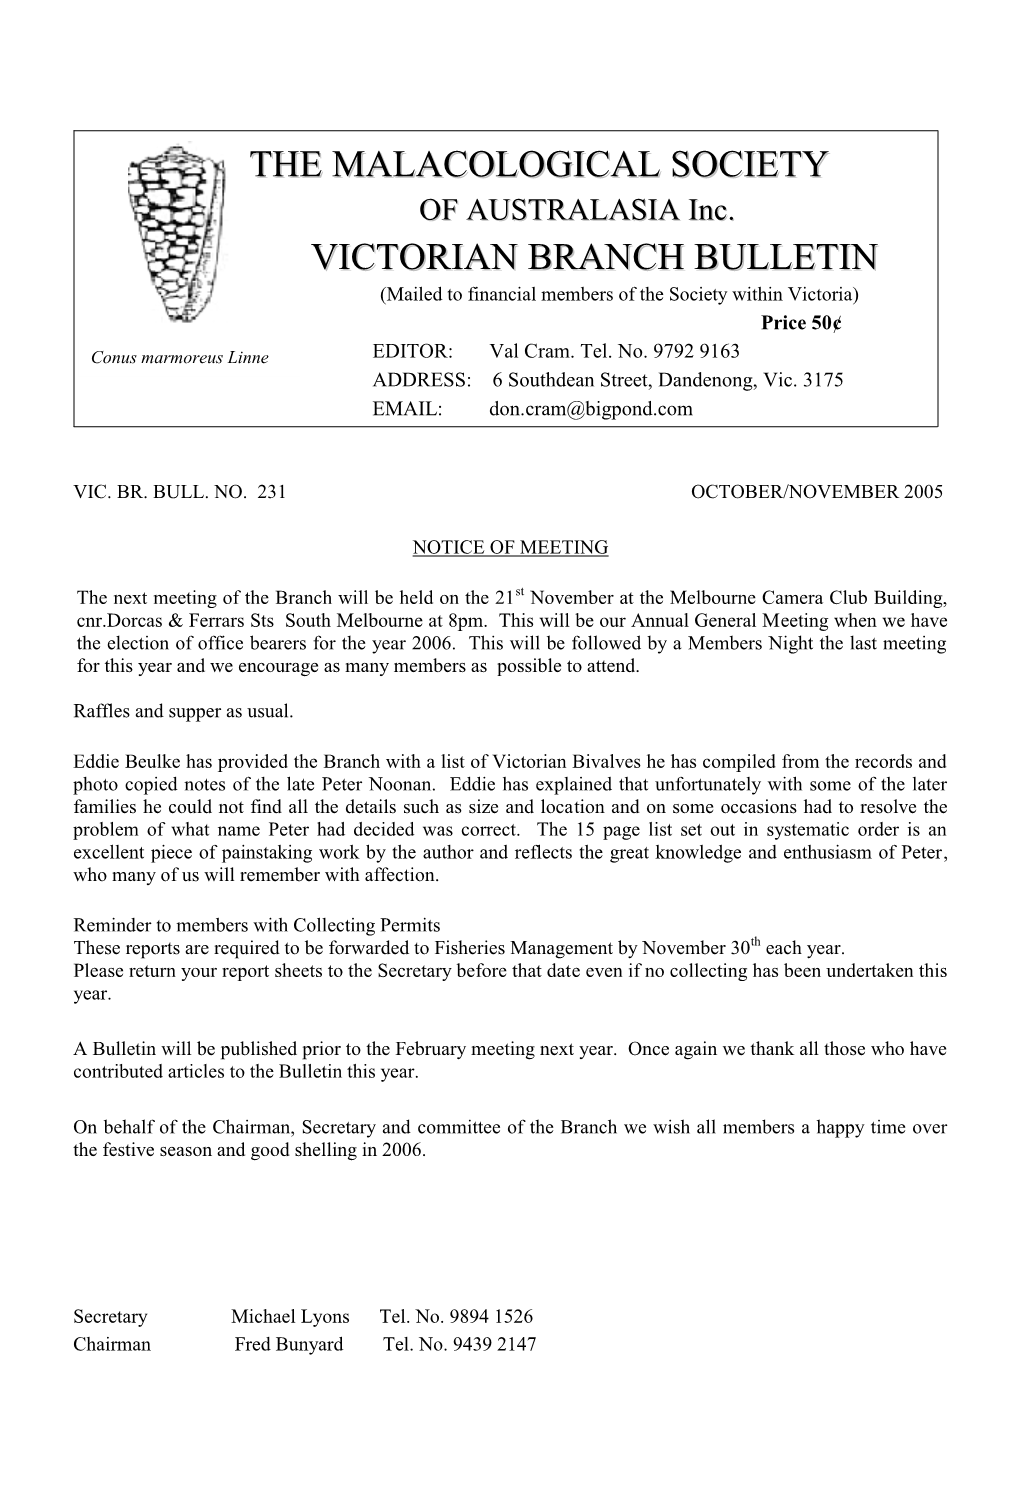 BULLETIN (Mailed to Financial Members of the Society Within Victoria) Price 50¢